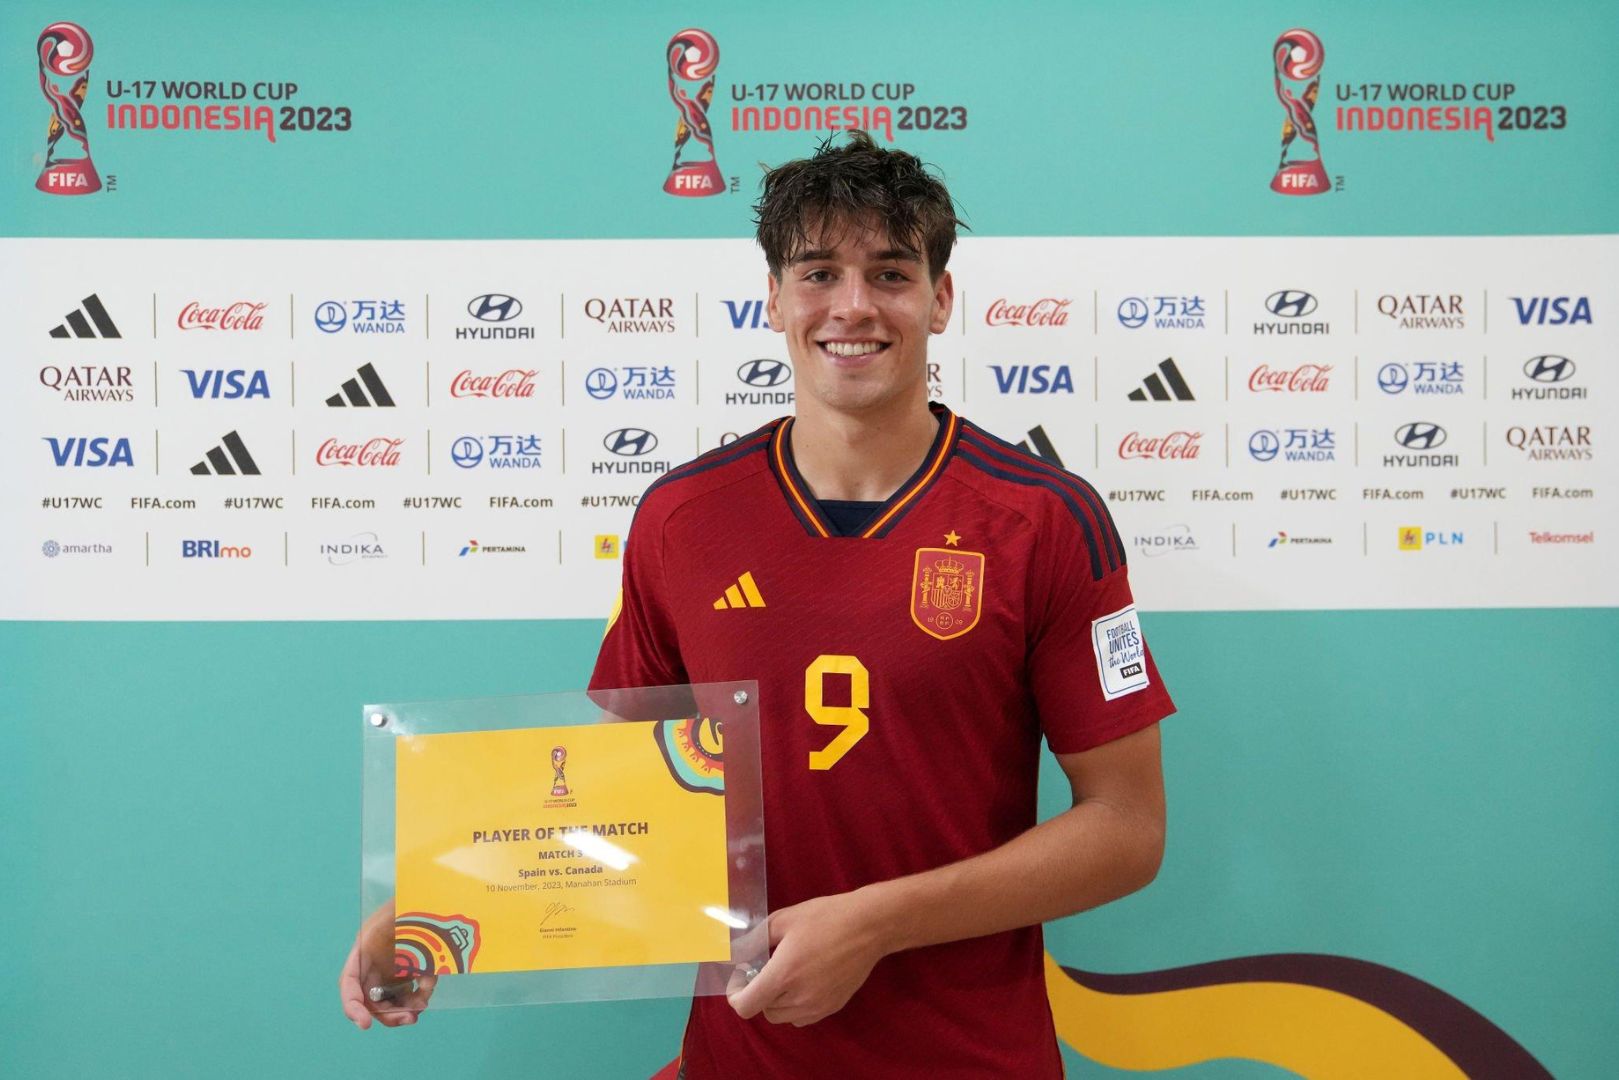 Marc Guiu of FC Barcelona  ( Spain ) poses for a photo with his Player of the Match award after the FIFA U-17 World Cup Group B match between Spain and Canada at Manahan Stadium on November 10, 2023 in Surakarta, Indonesia.